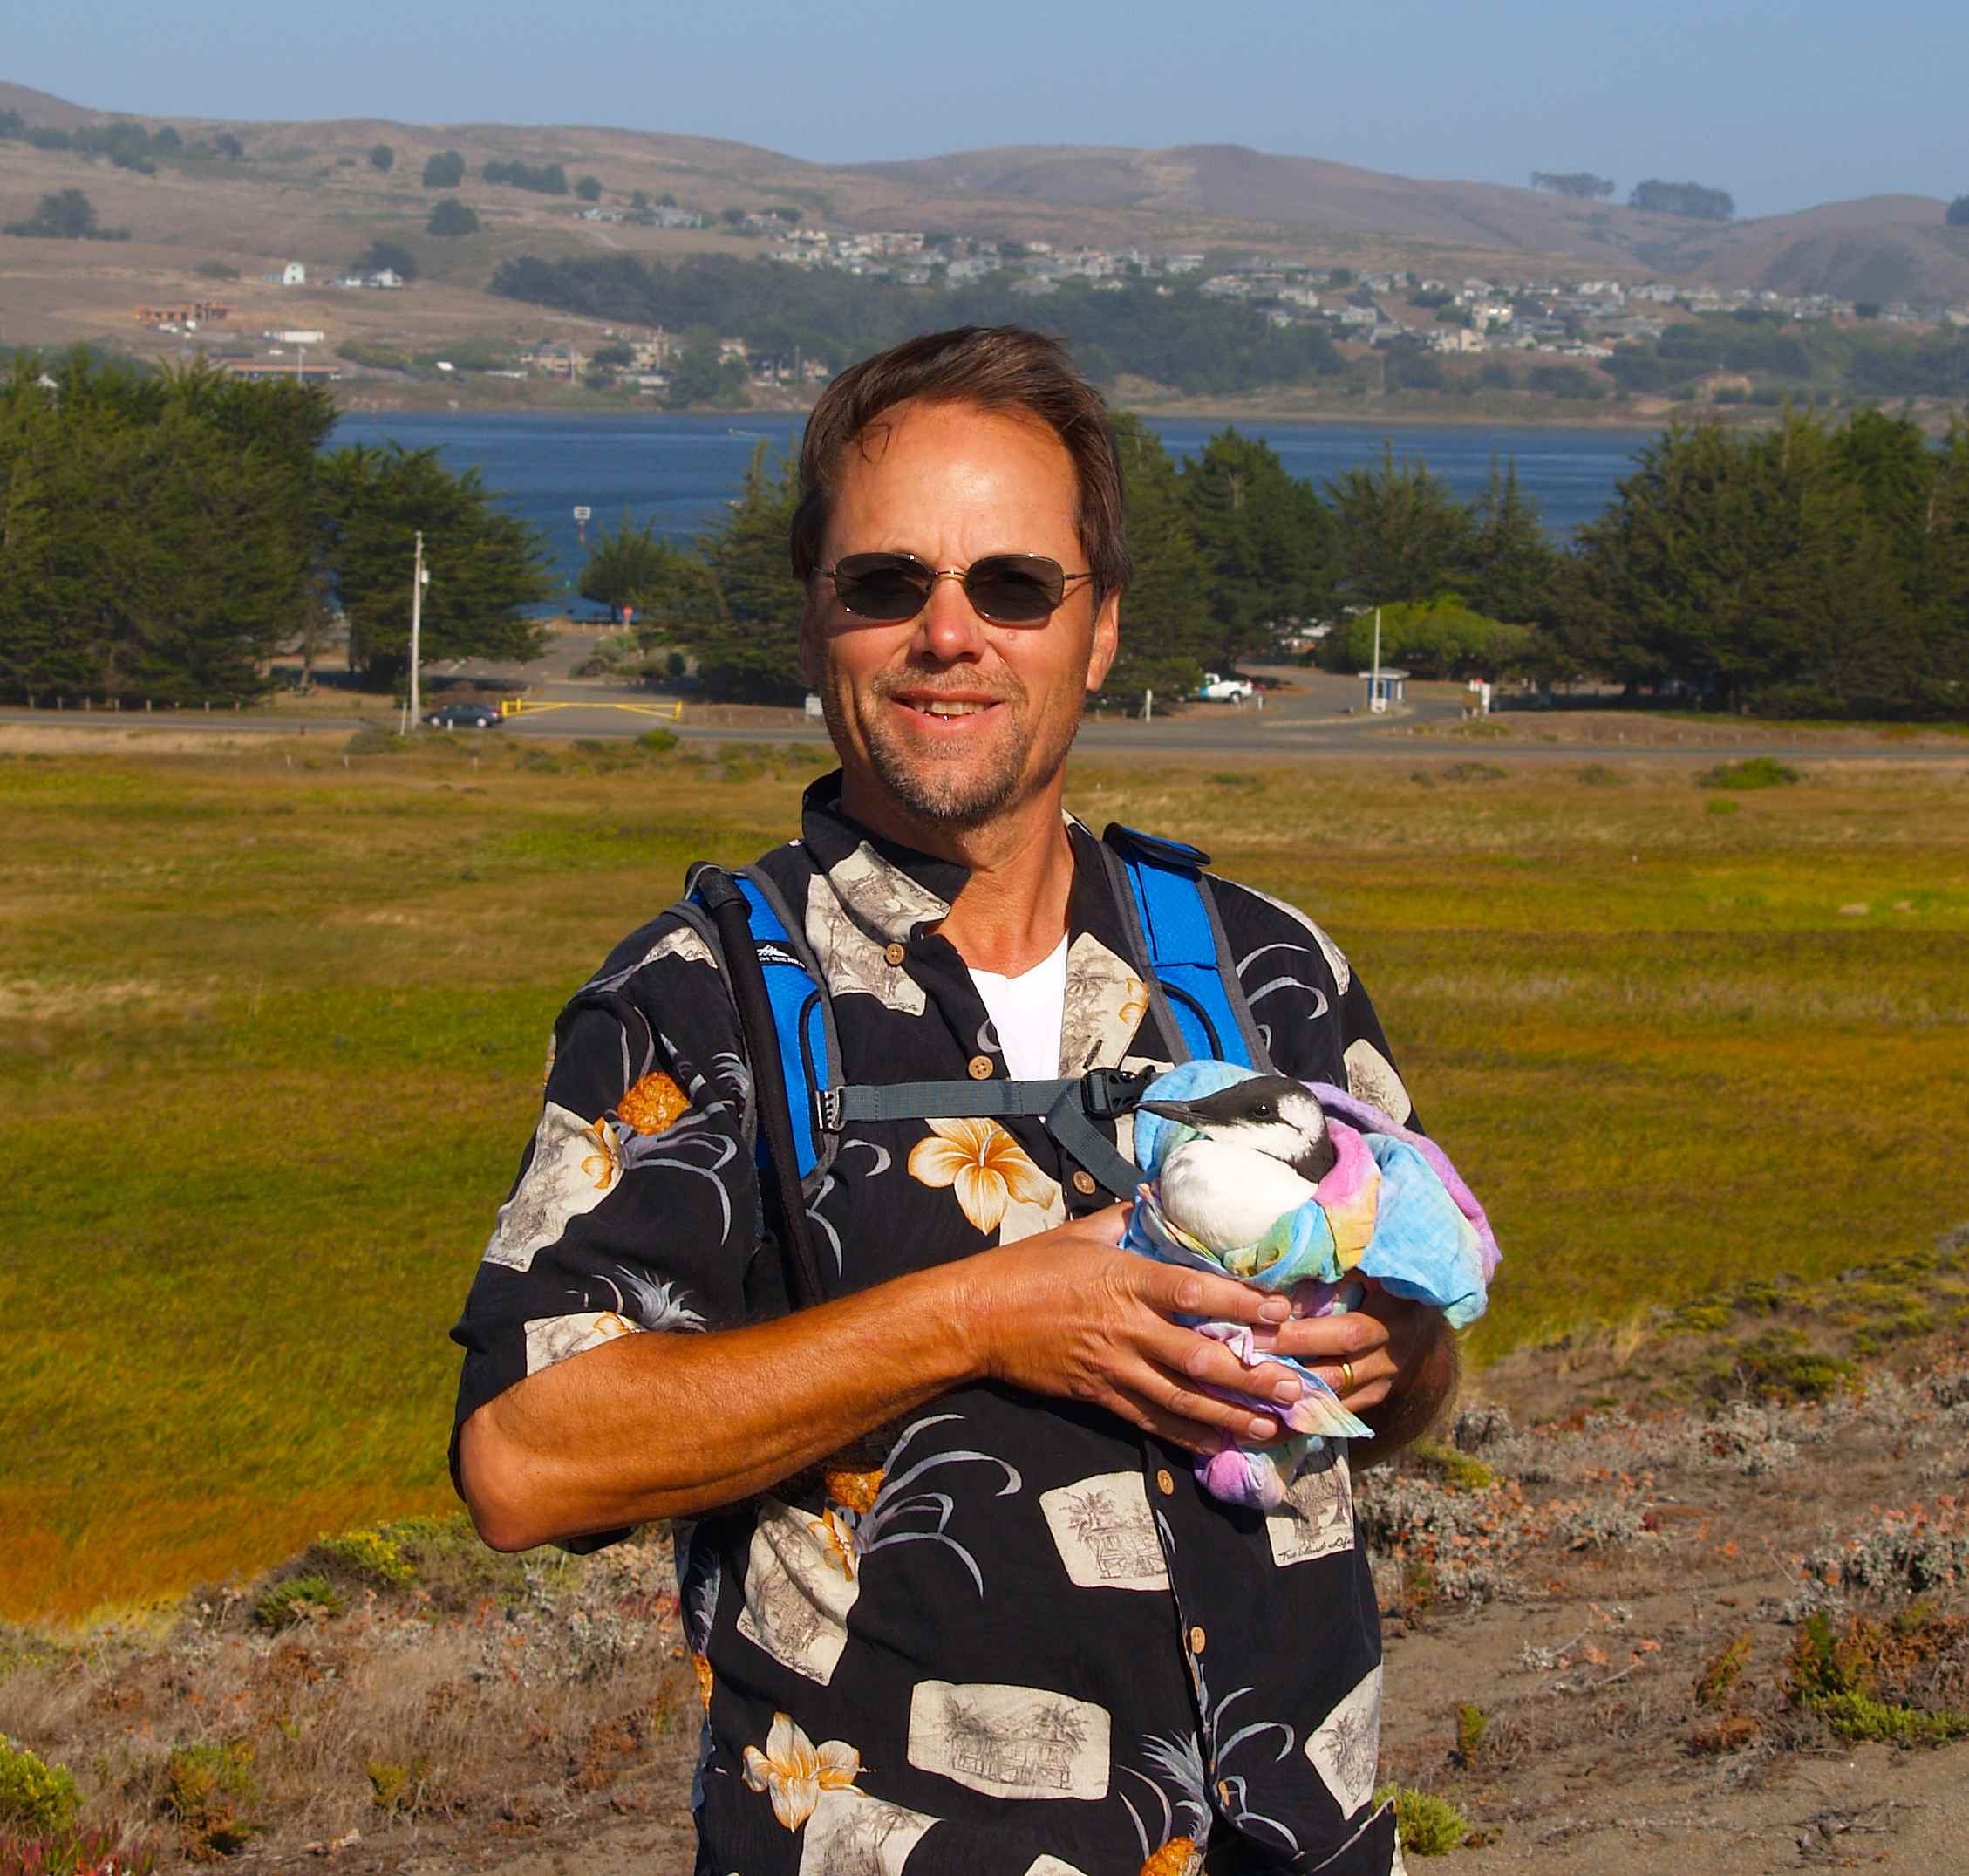 Capt. William E. Simpson on location in Bodega Bay, CA with a rescued Murre. A Murre is a sea bird that is capable of diving up to 100 meters in search of food.